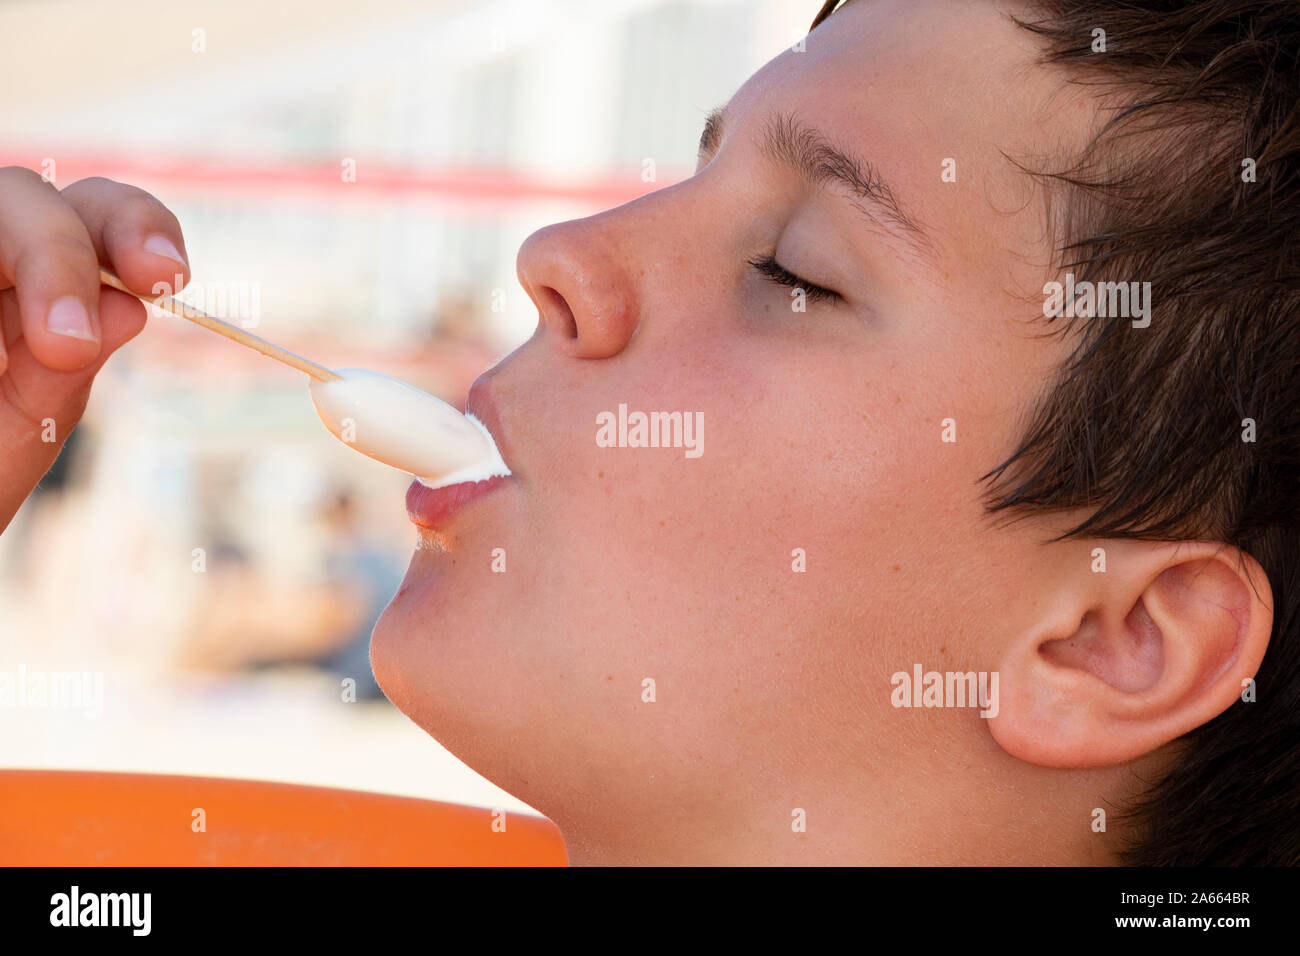 A close up photograph of a boy eating a white vanilla ice lolly Stock Photo